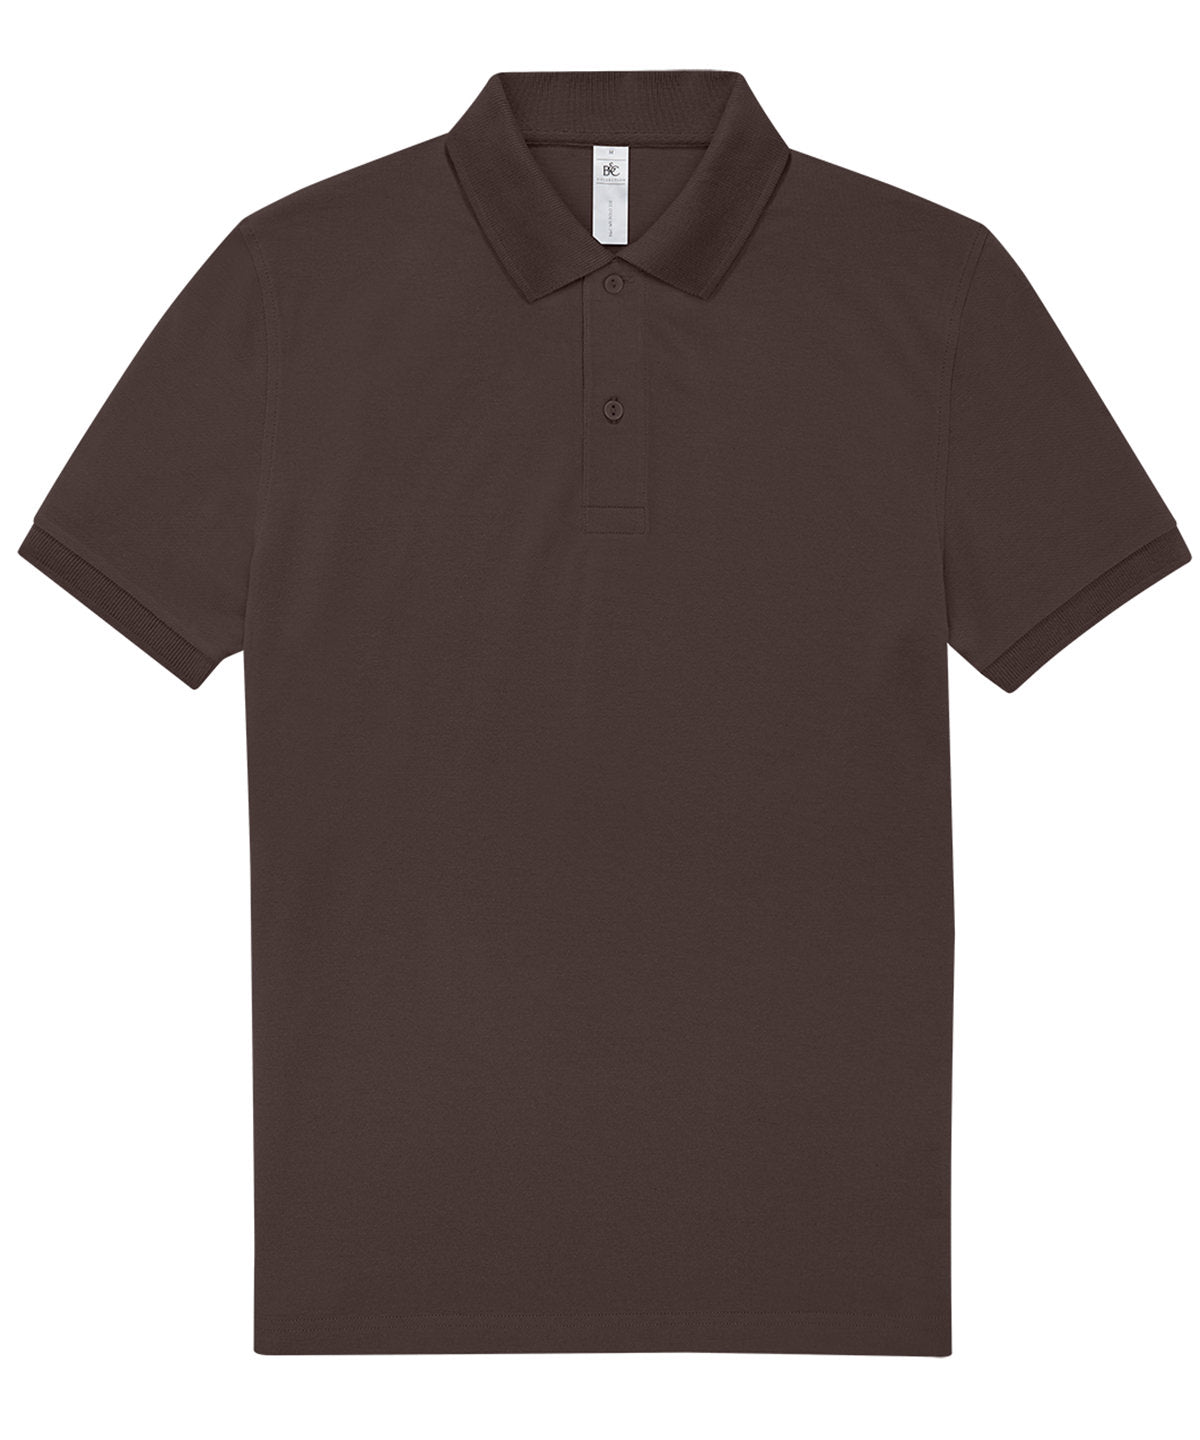 B&C Collection My Polo 210 Roasted Coffee